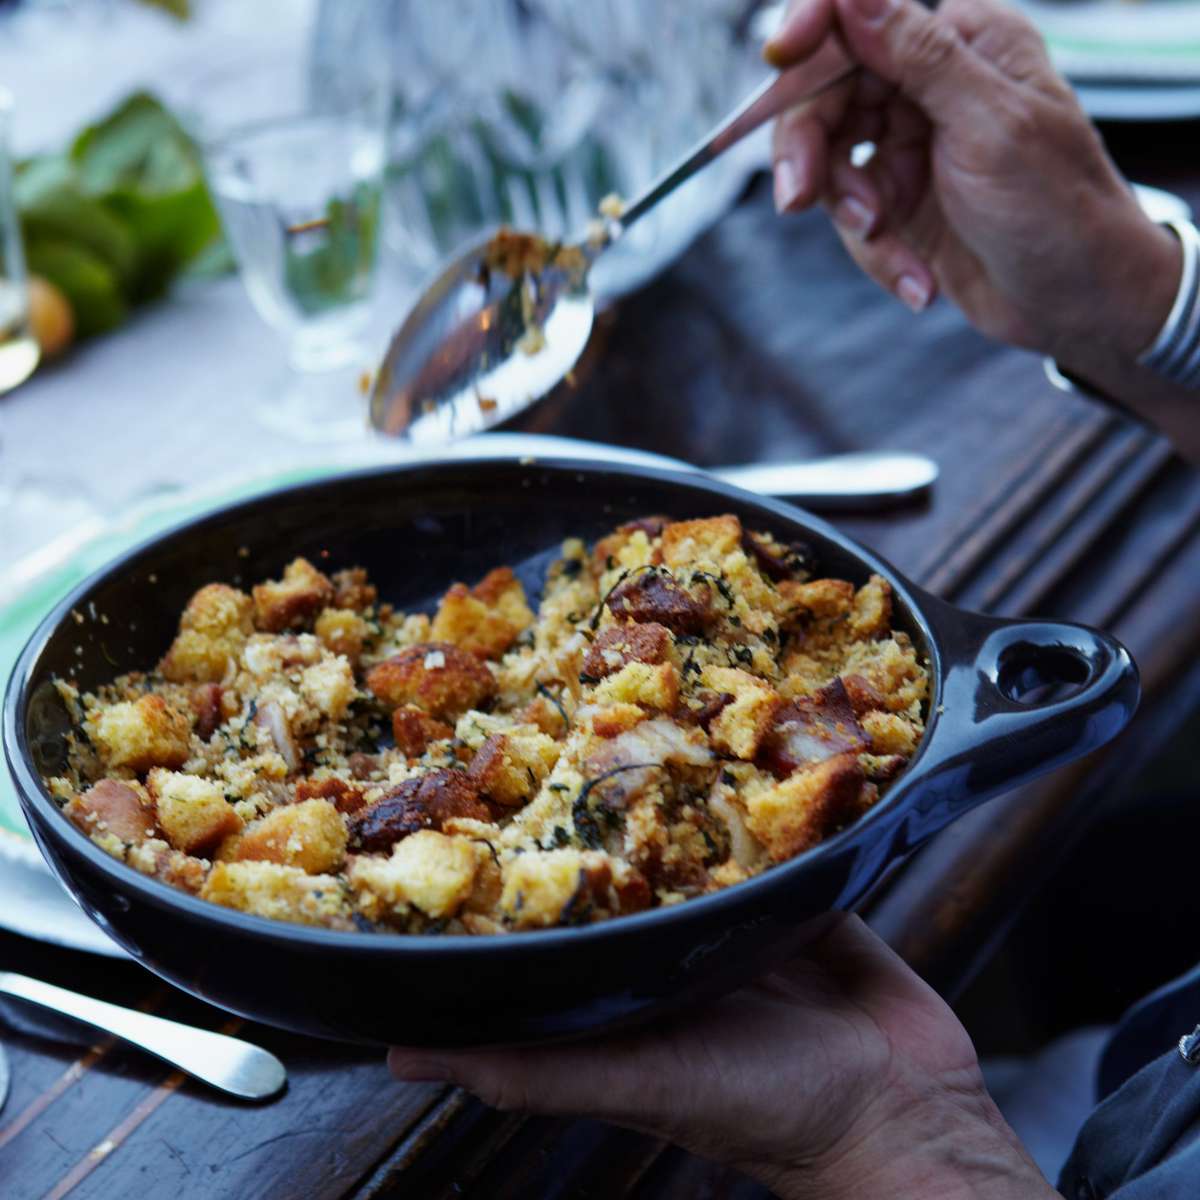 Corn Bread Stuffing with Bacon and Greens